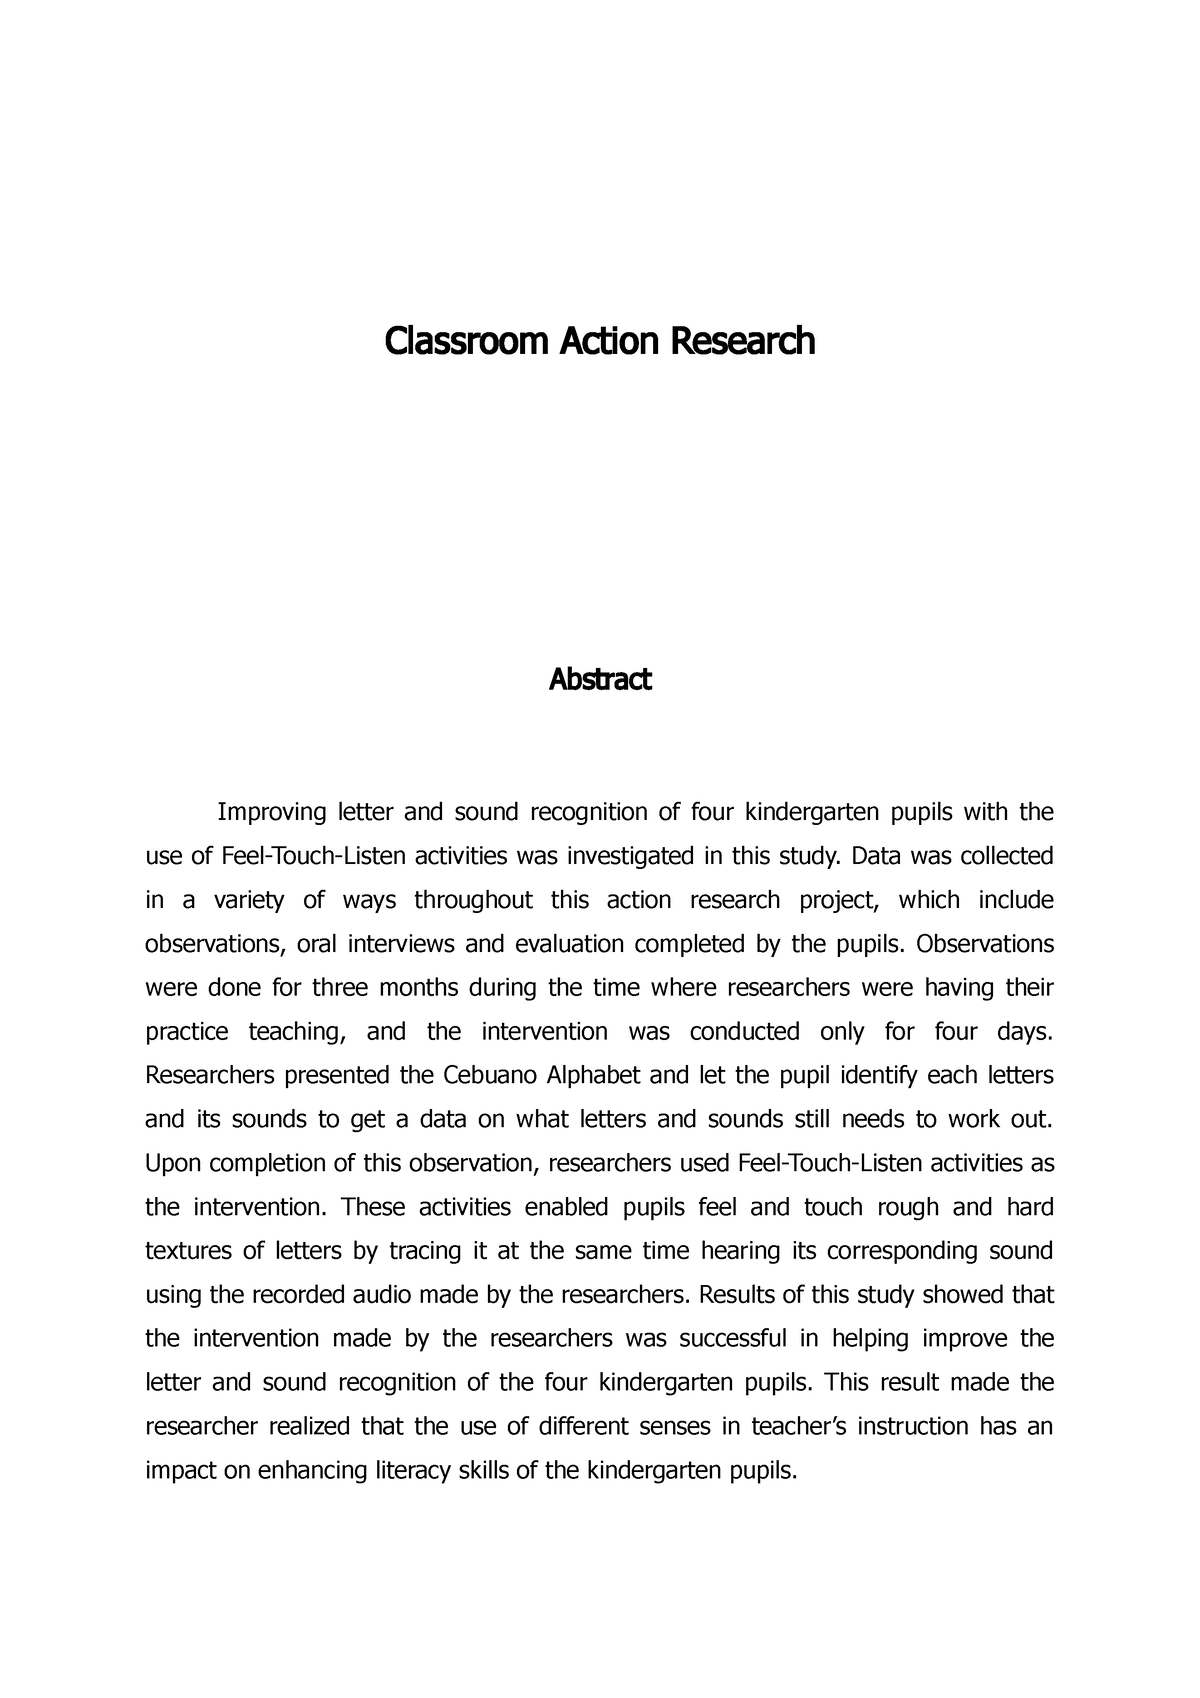 action research abstract sample